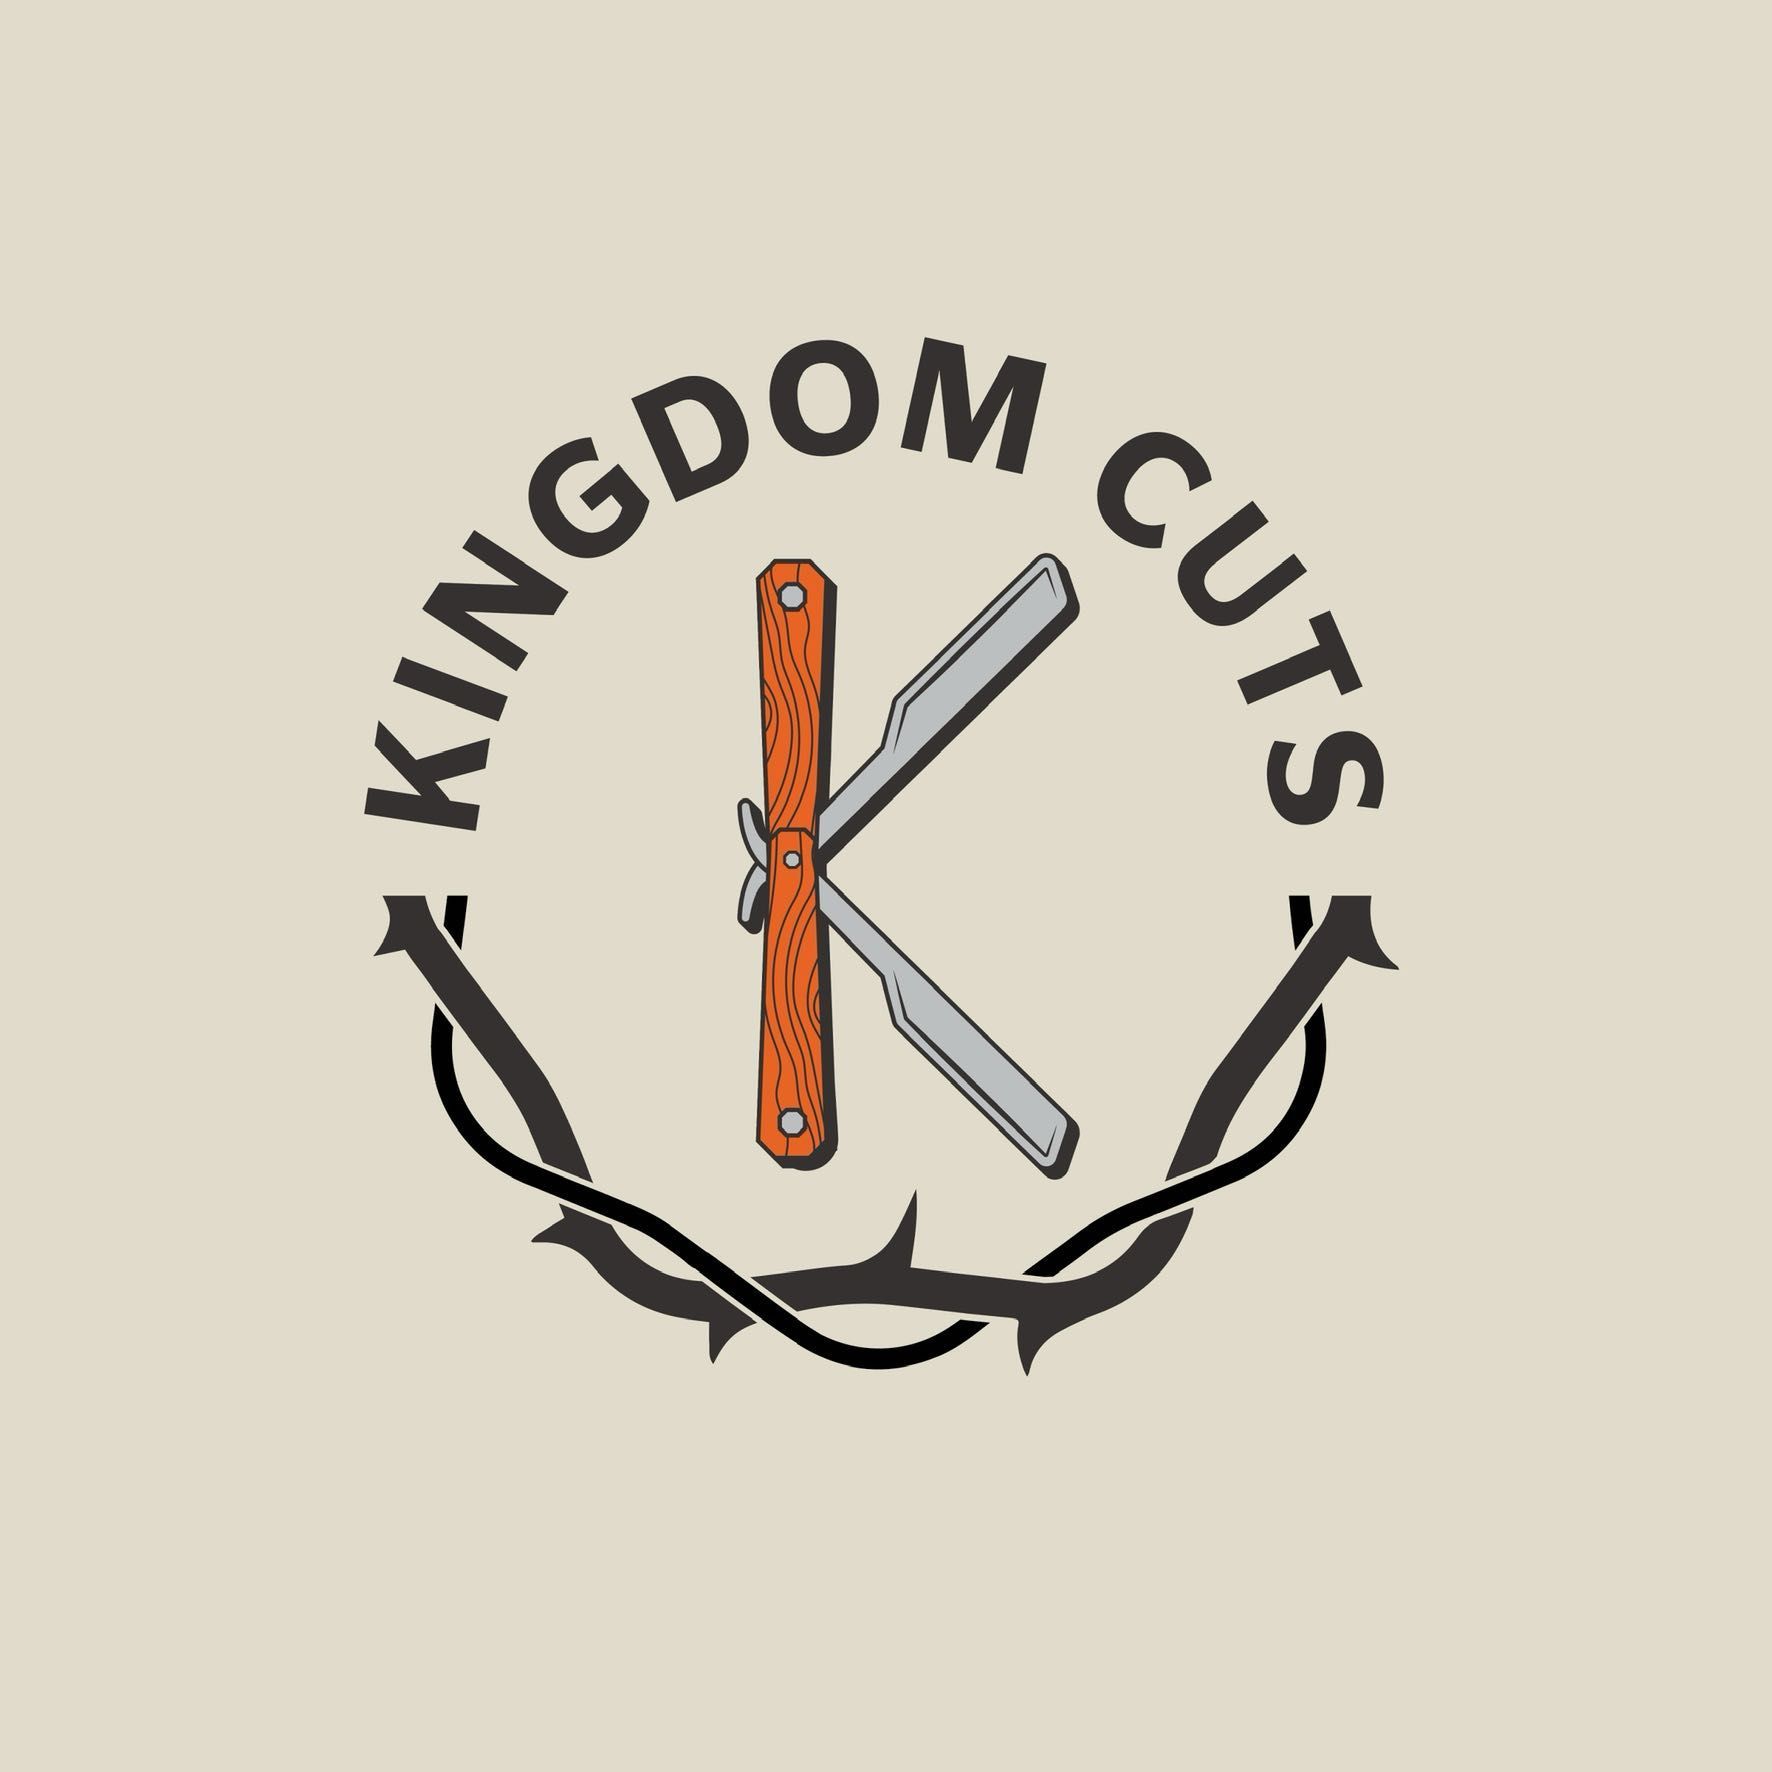 Kingdom Cuts - Quincy, 150 S 48th St, Quincy, 62305